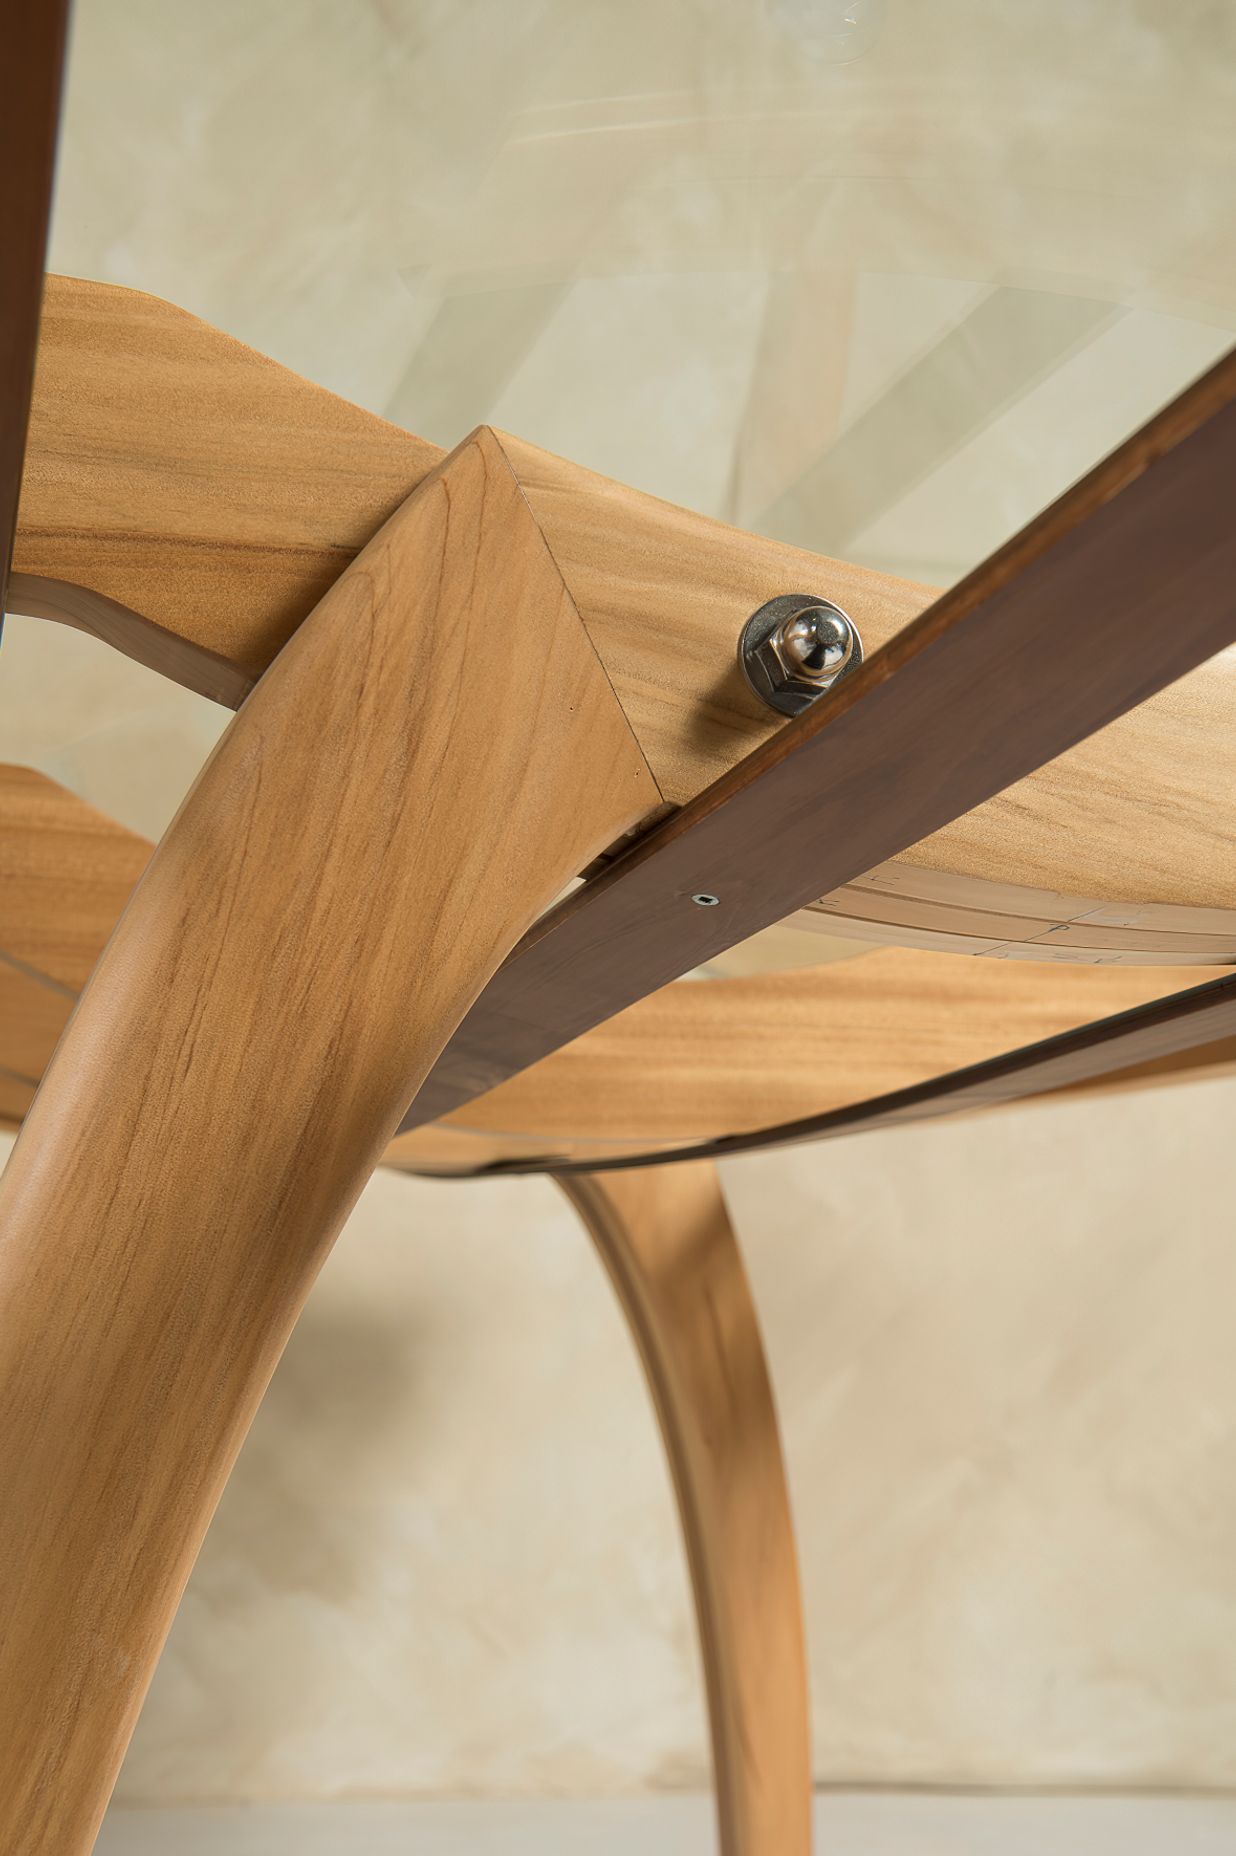 The Bailey Table reflects the elegant early lines of the ‘golden era’ of yachting.